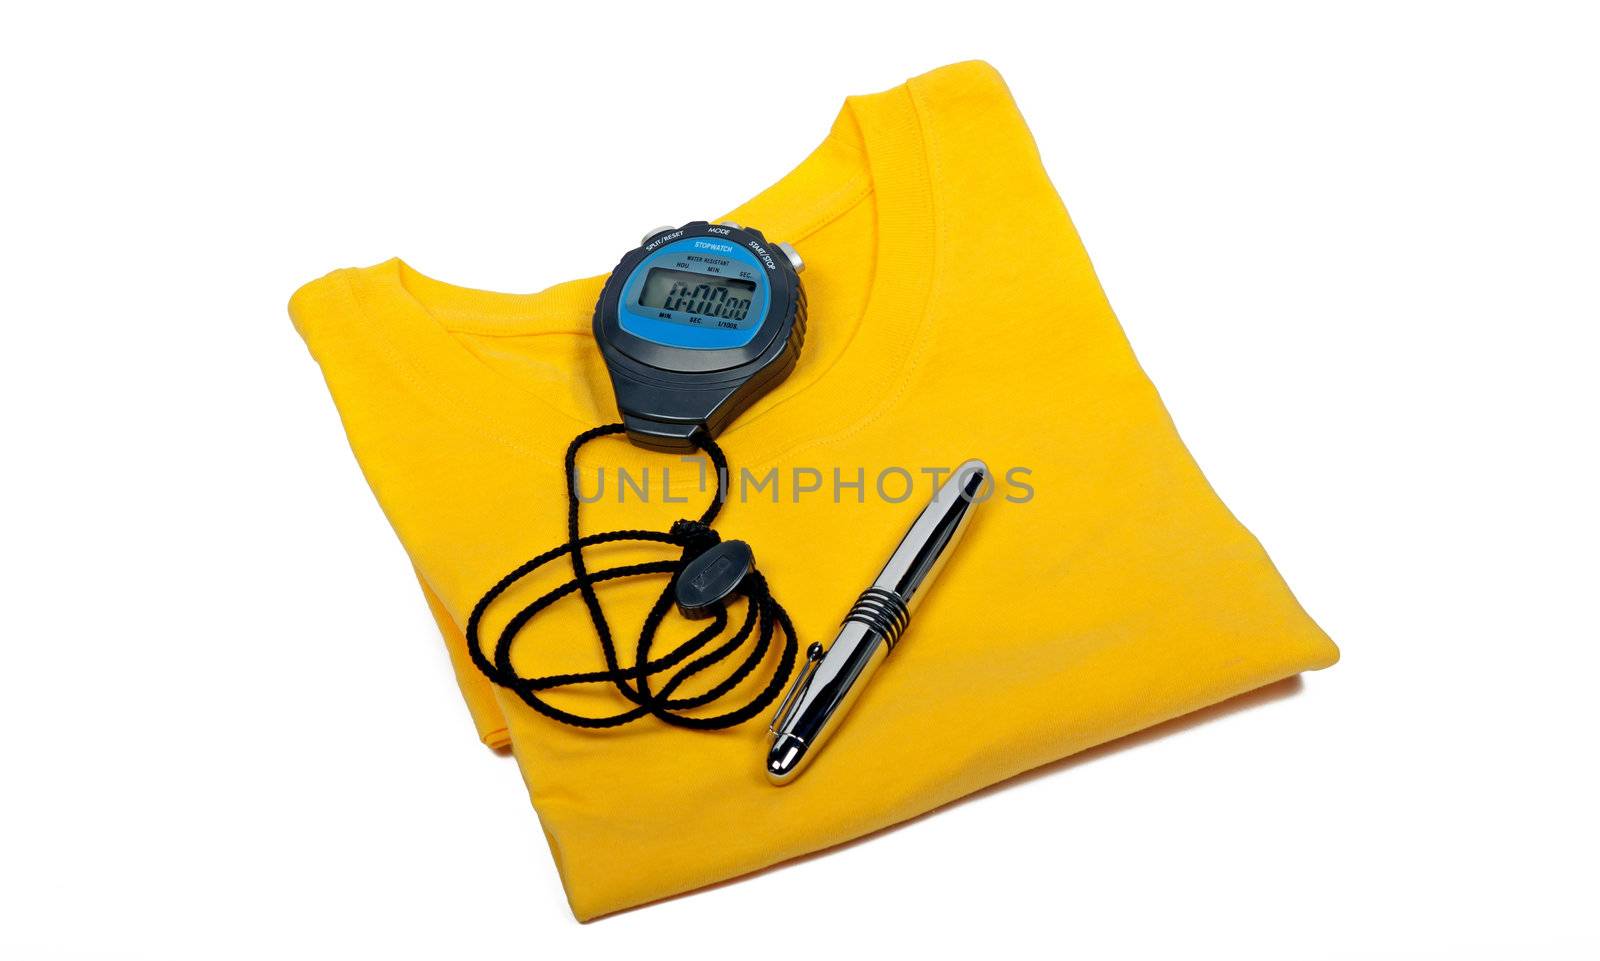 T shirt, digital stop watch and ballpoint pen by sewer12